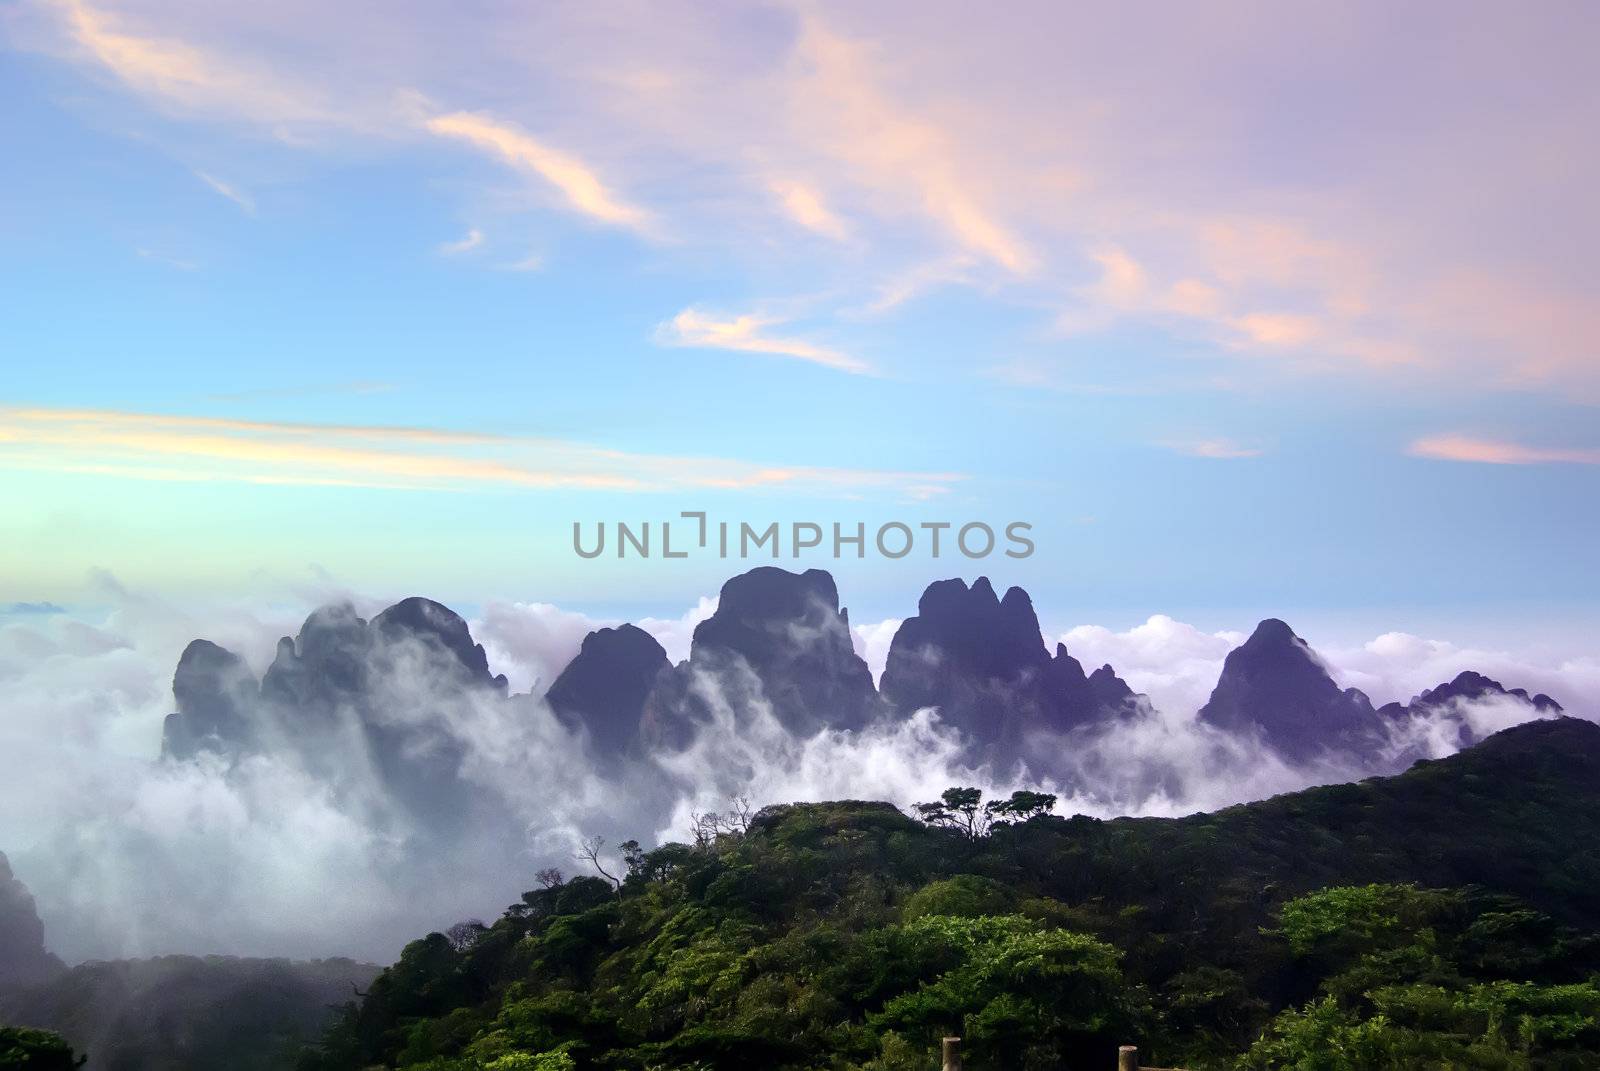 The cloud and mist of Shengtangshan mountain by xfdly5